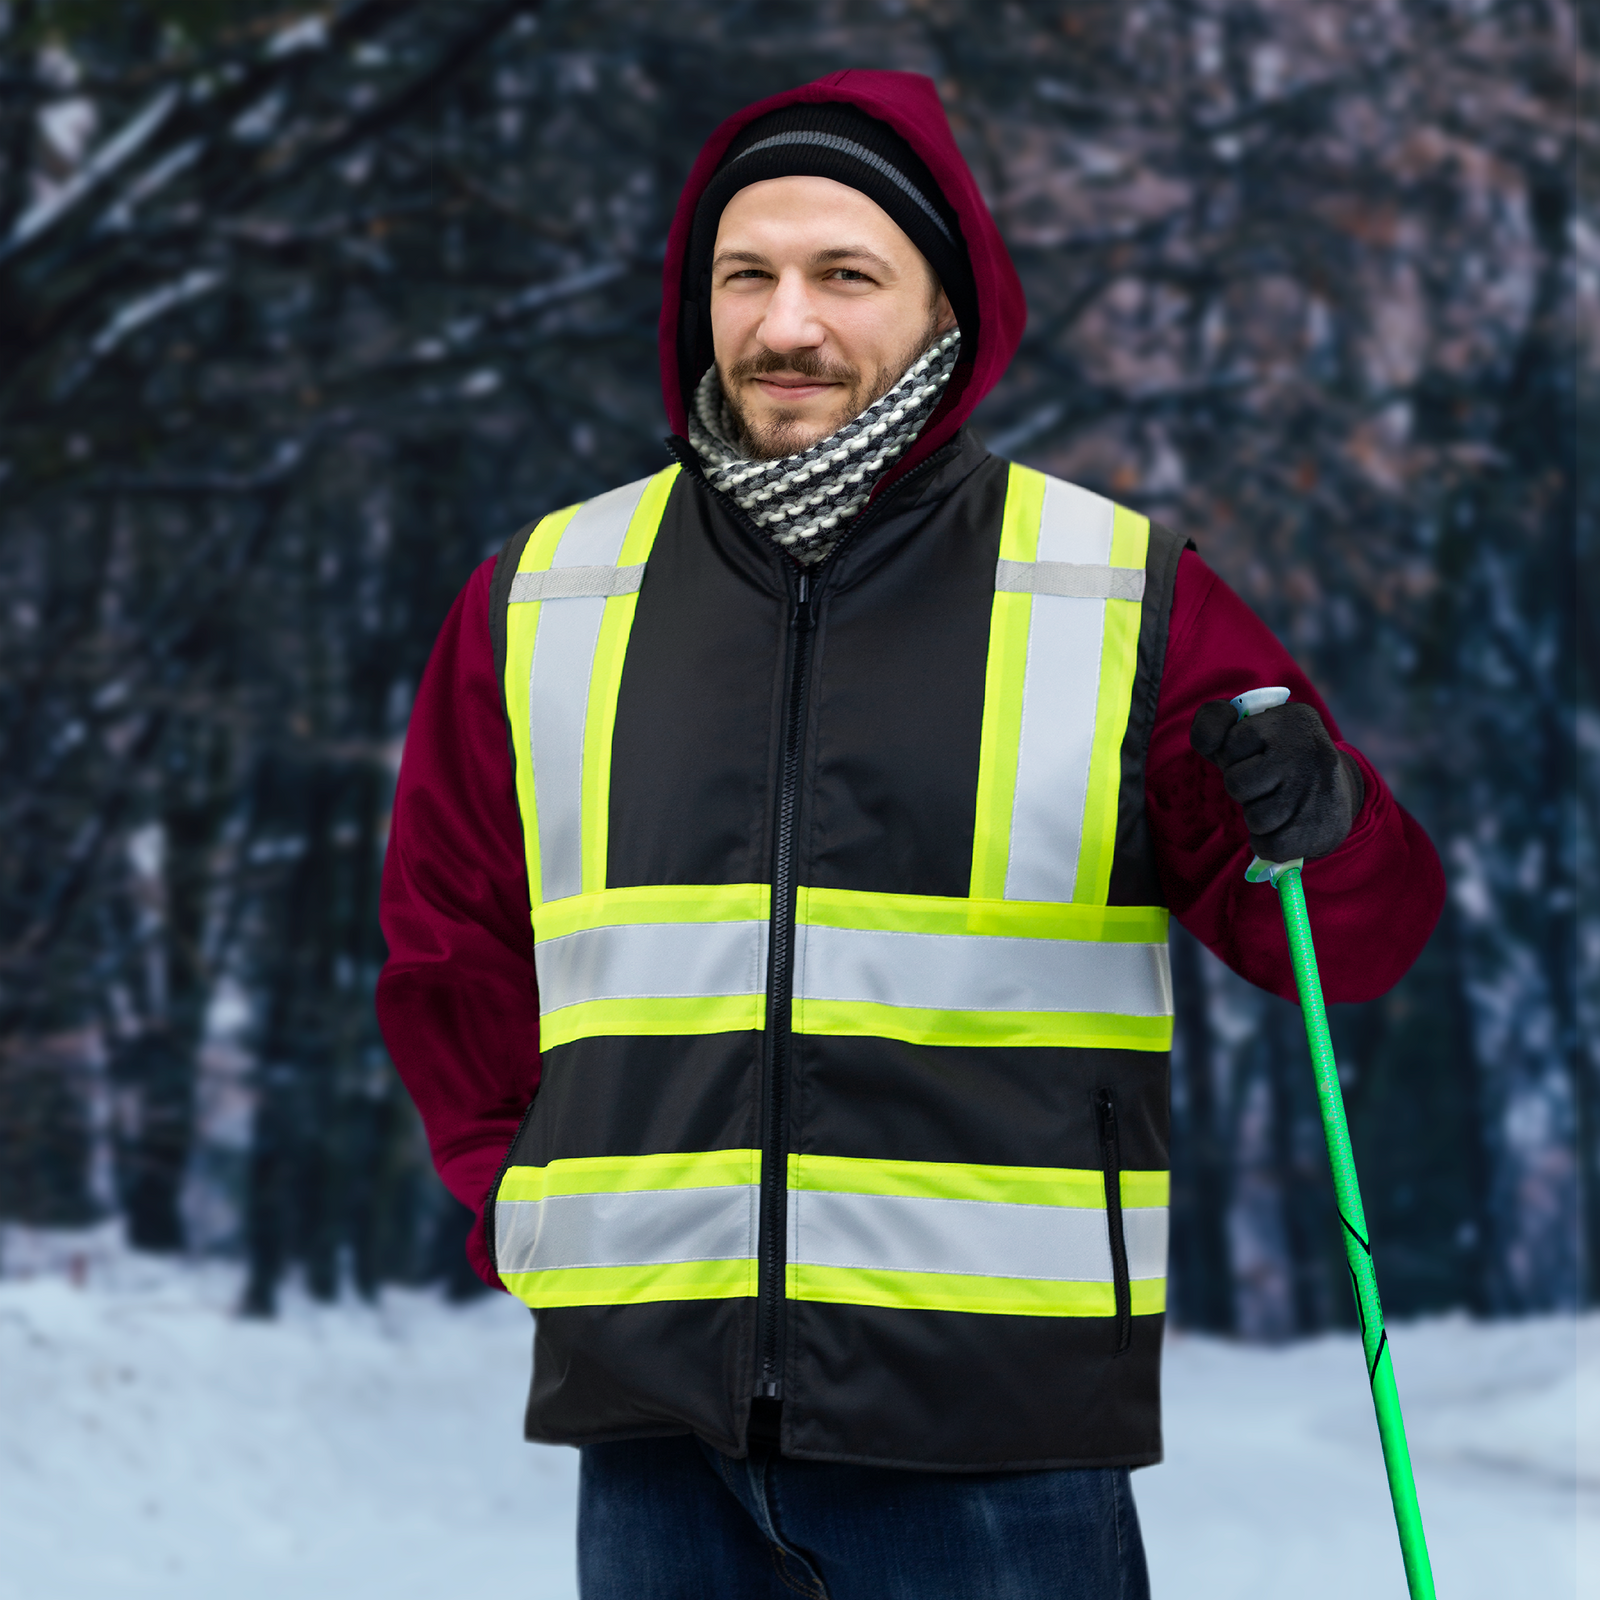 A man wering the two tone black and yellow insulated safety vest for winter